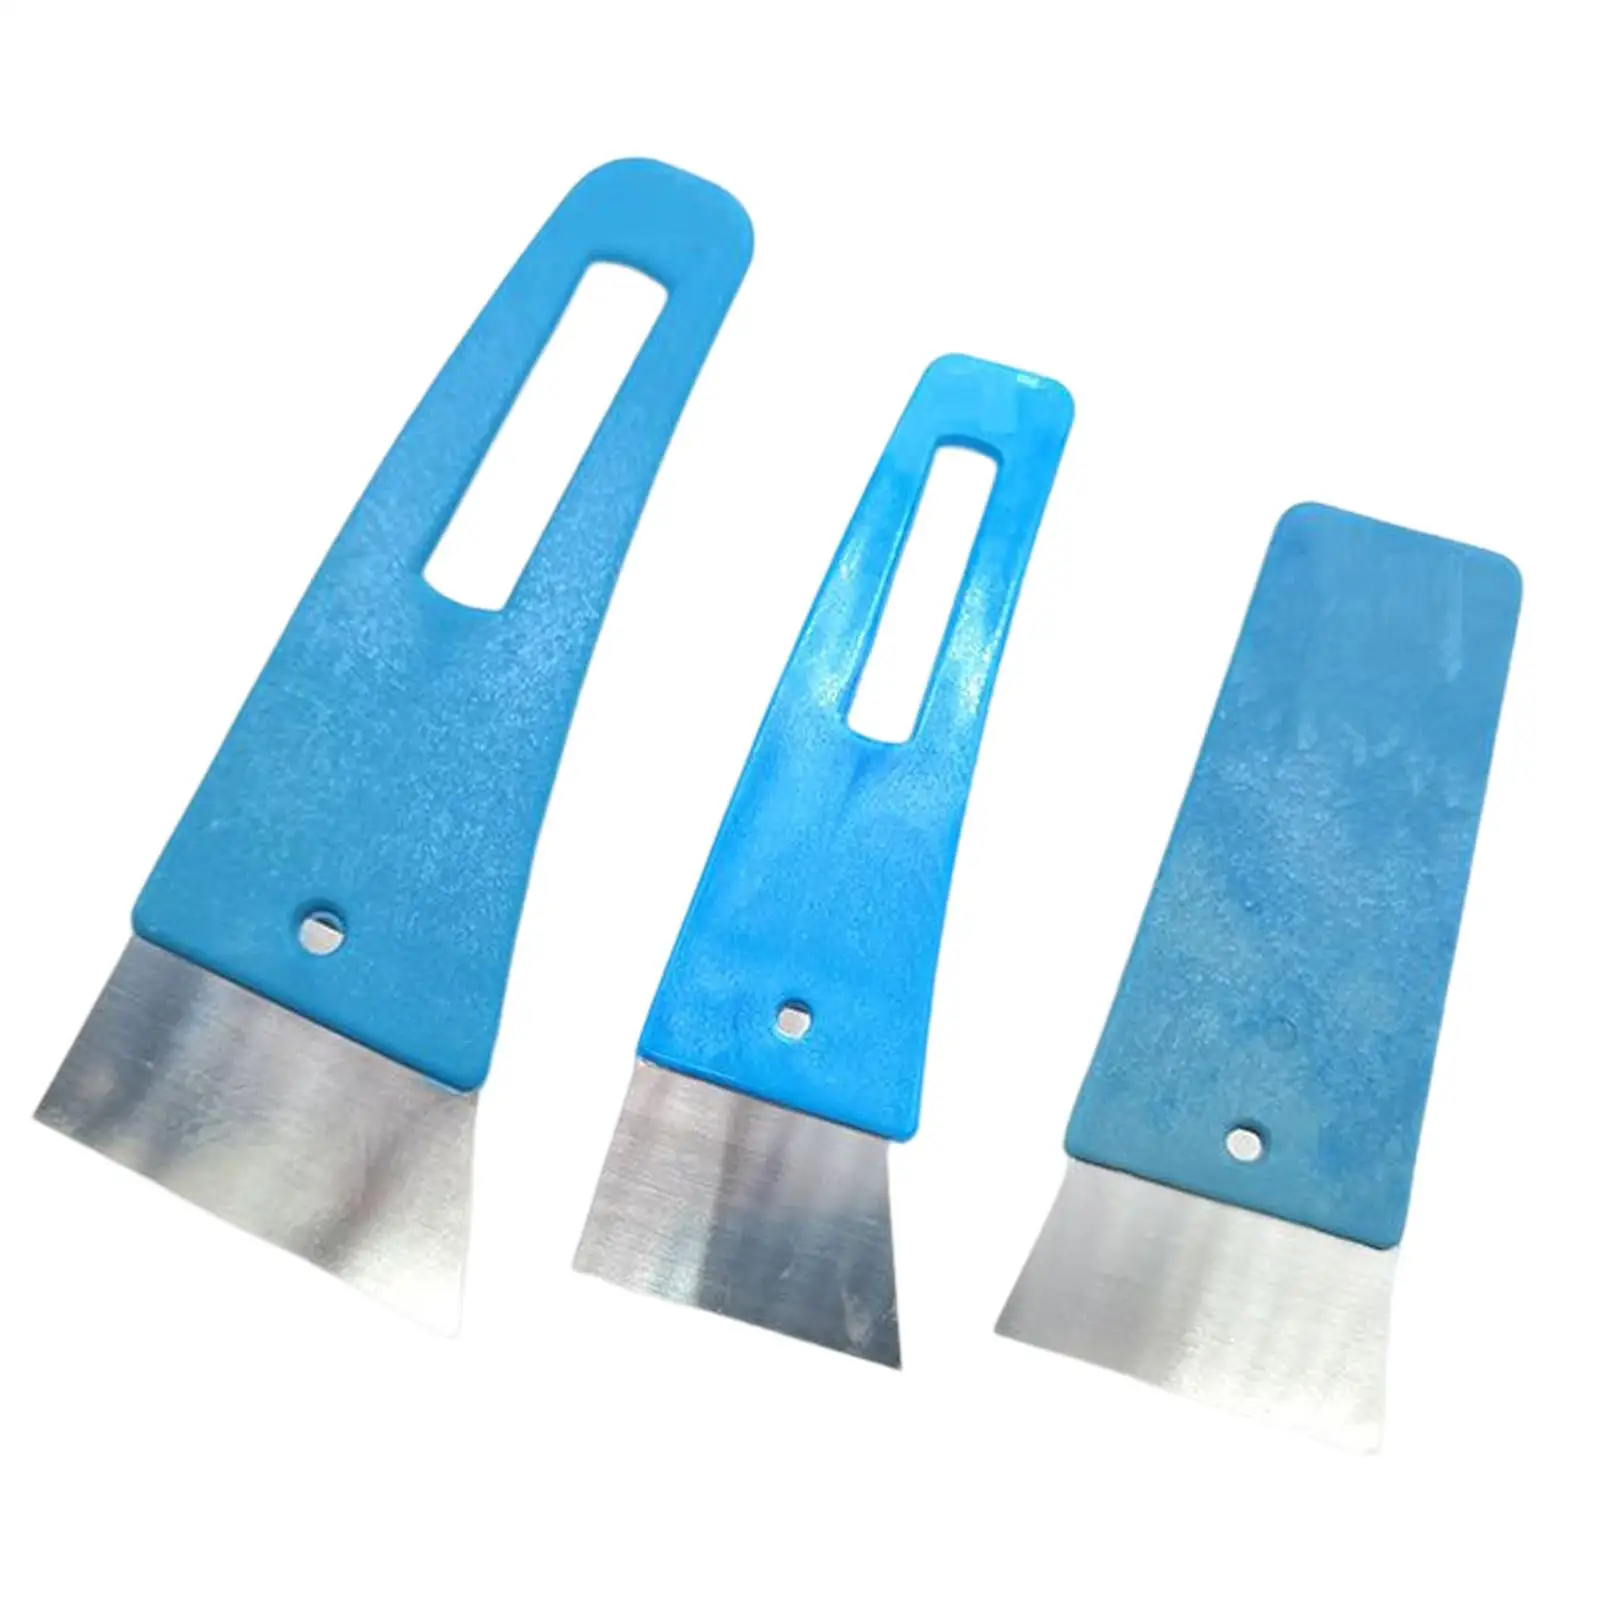 3 Pieces Car Window Film Scraper Squeegee Set Pushing Out Bubble Lines Improving